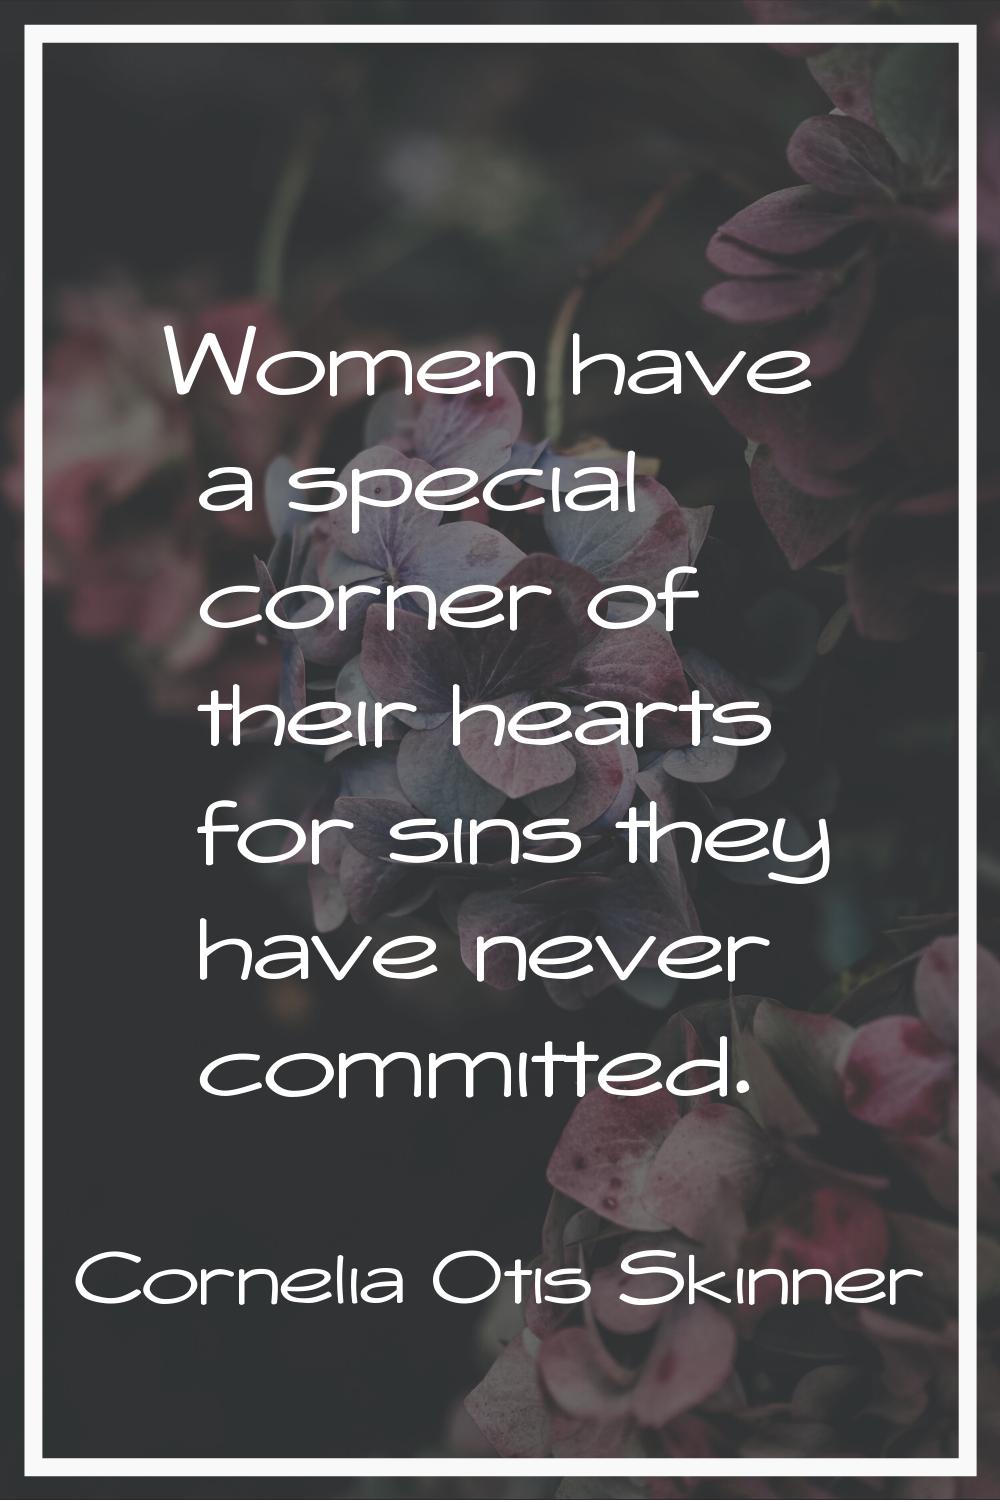 Women have a special corner of their hearts for sins they have never committed.